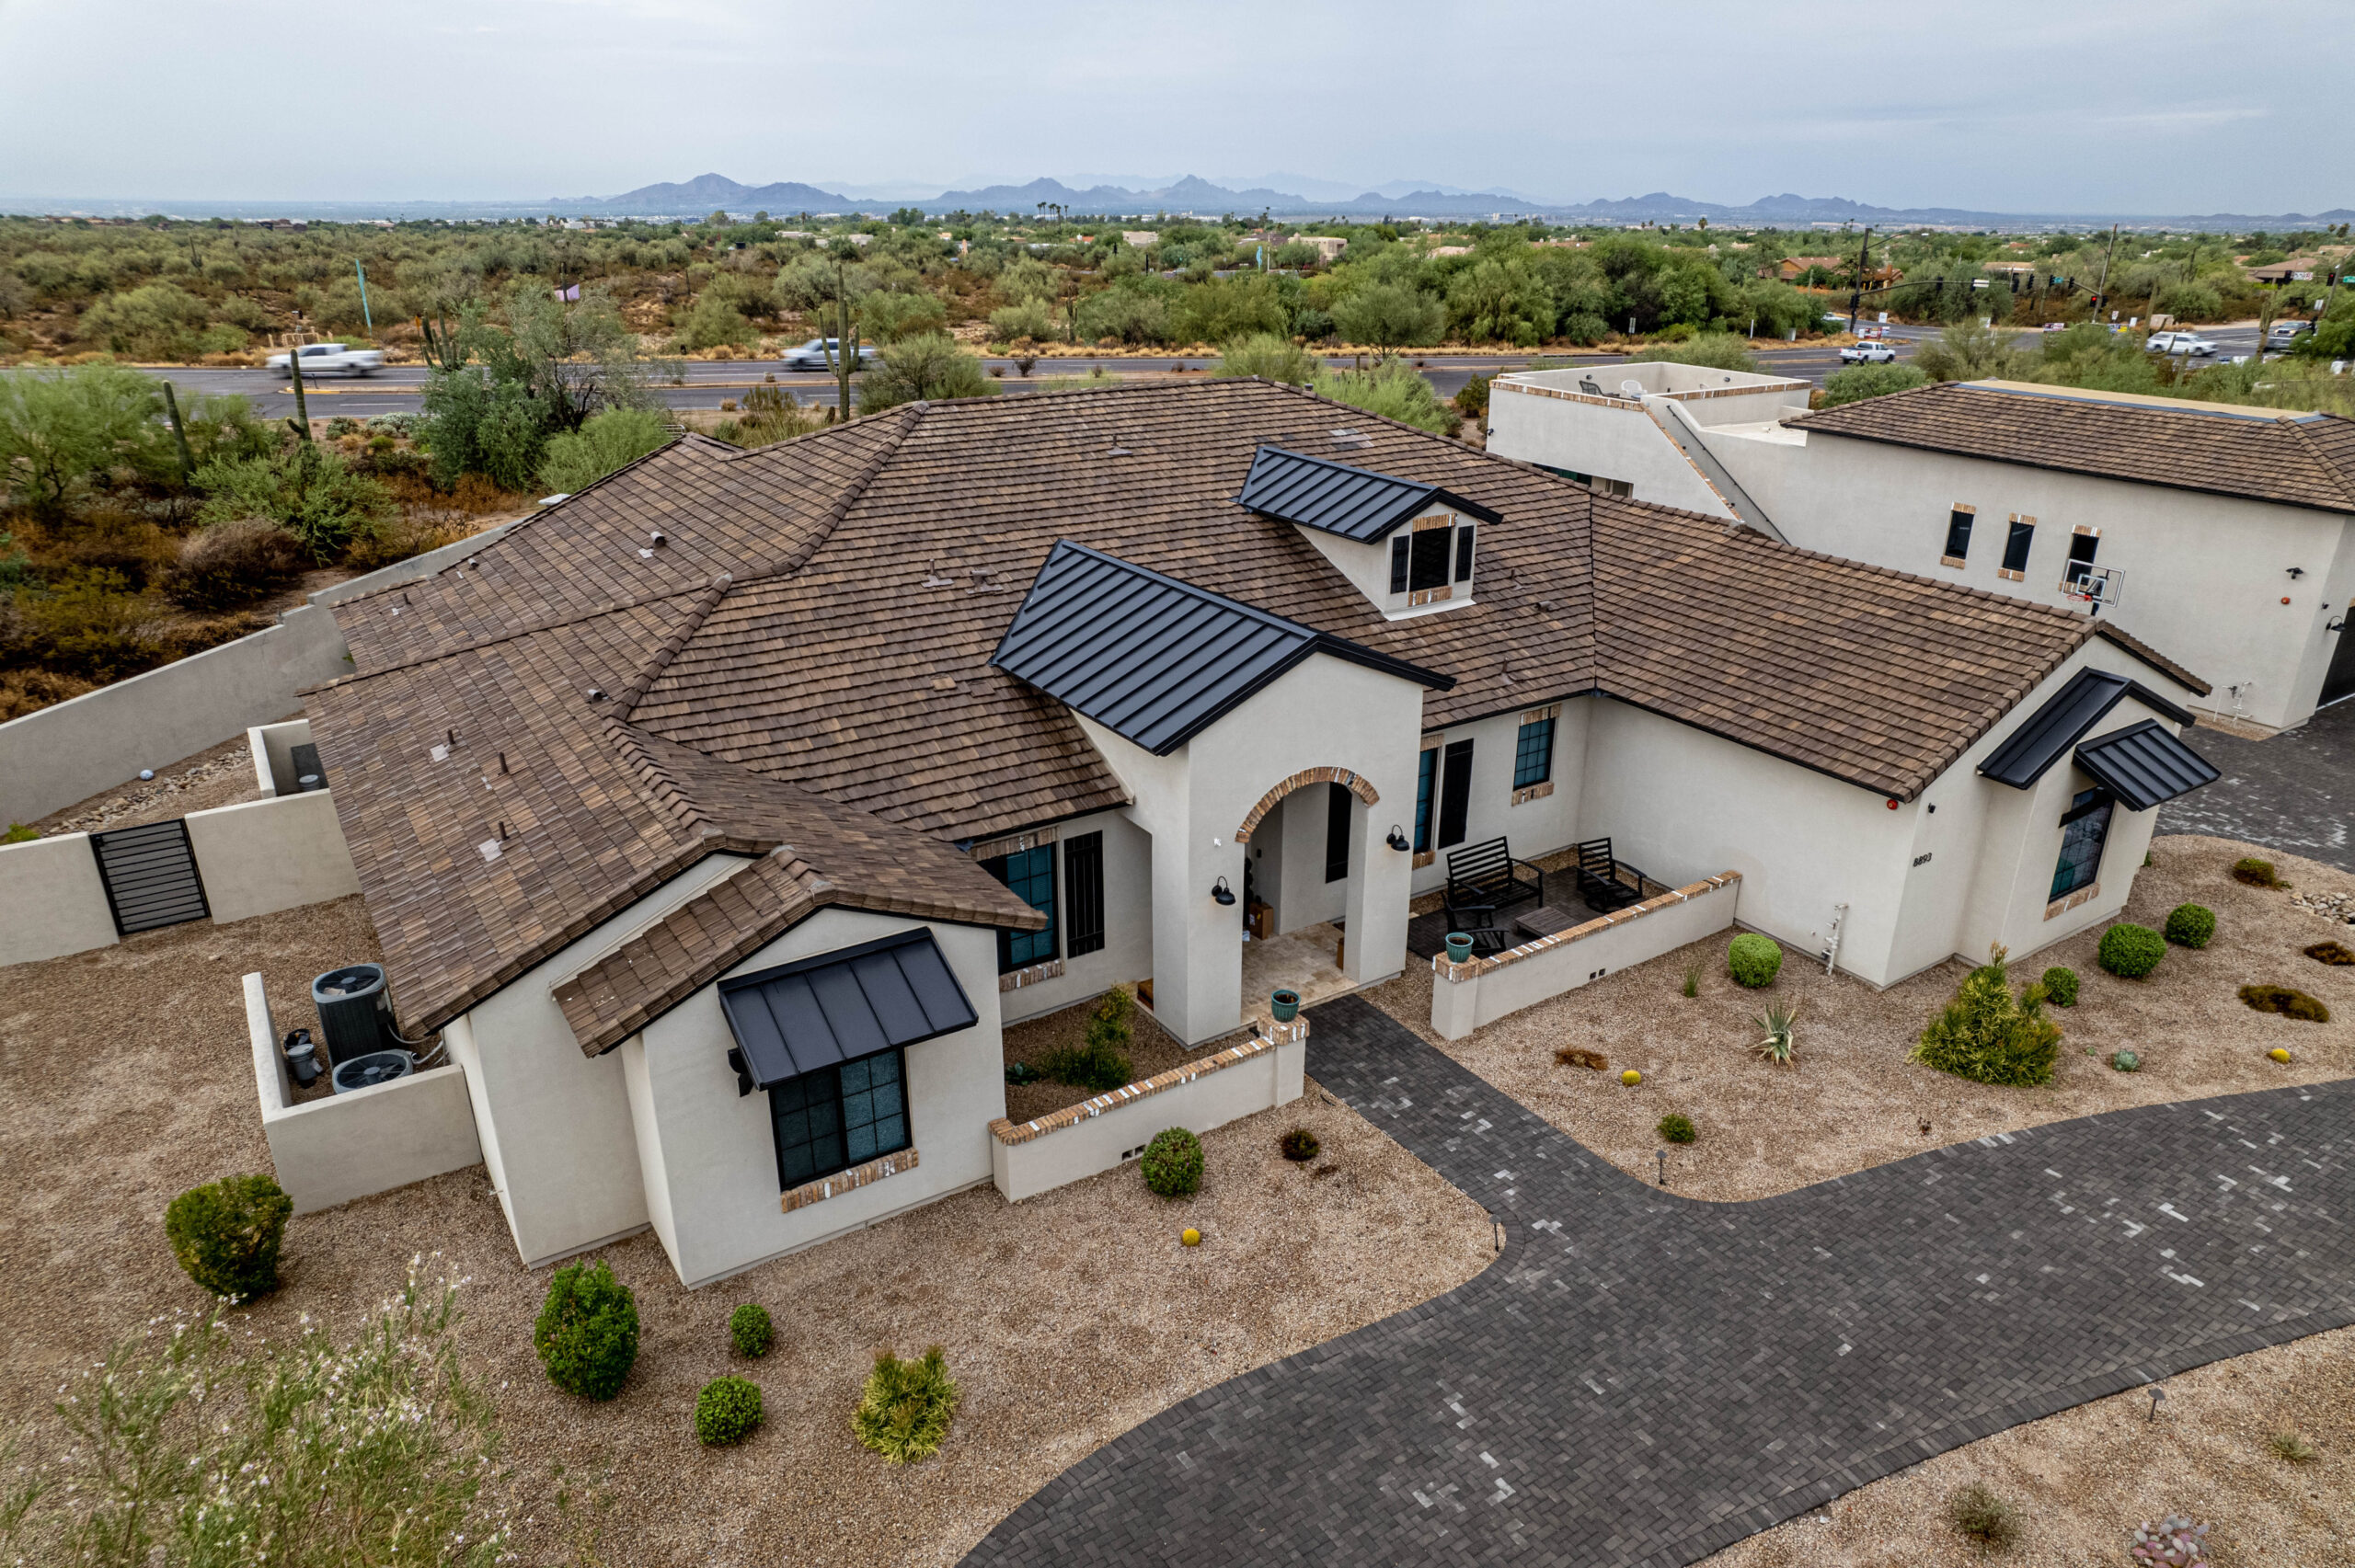 Aerial view of diverse tiles on Silverleaf homes by Behmer.